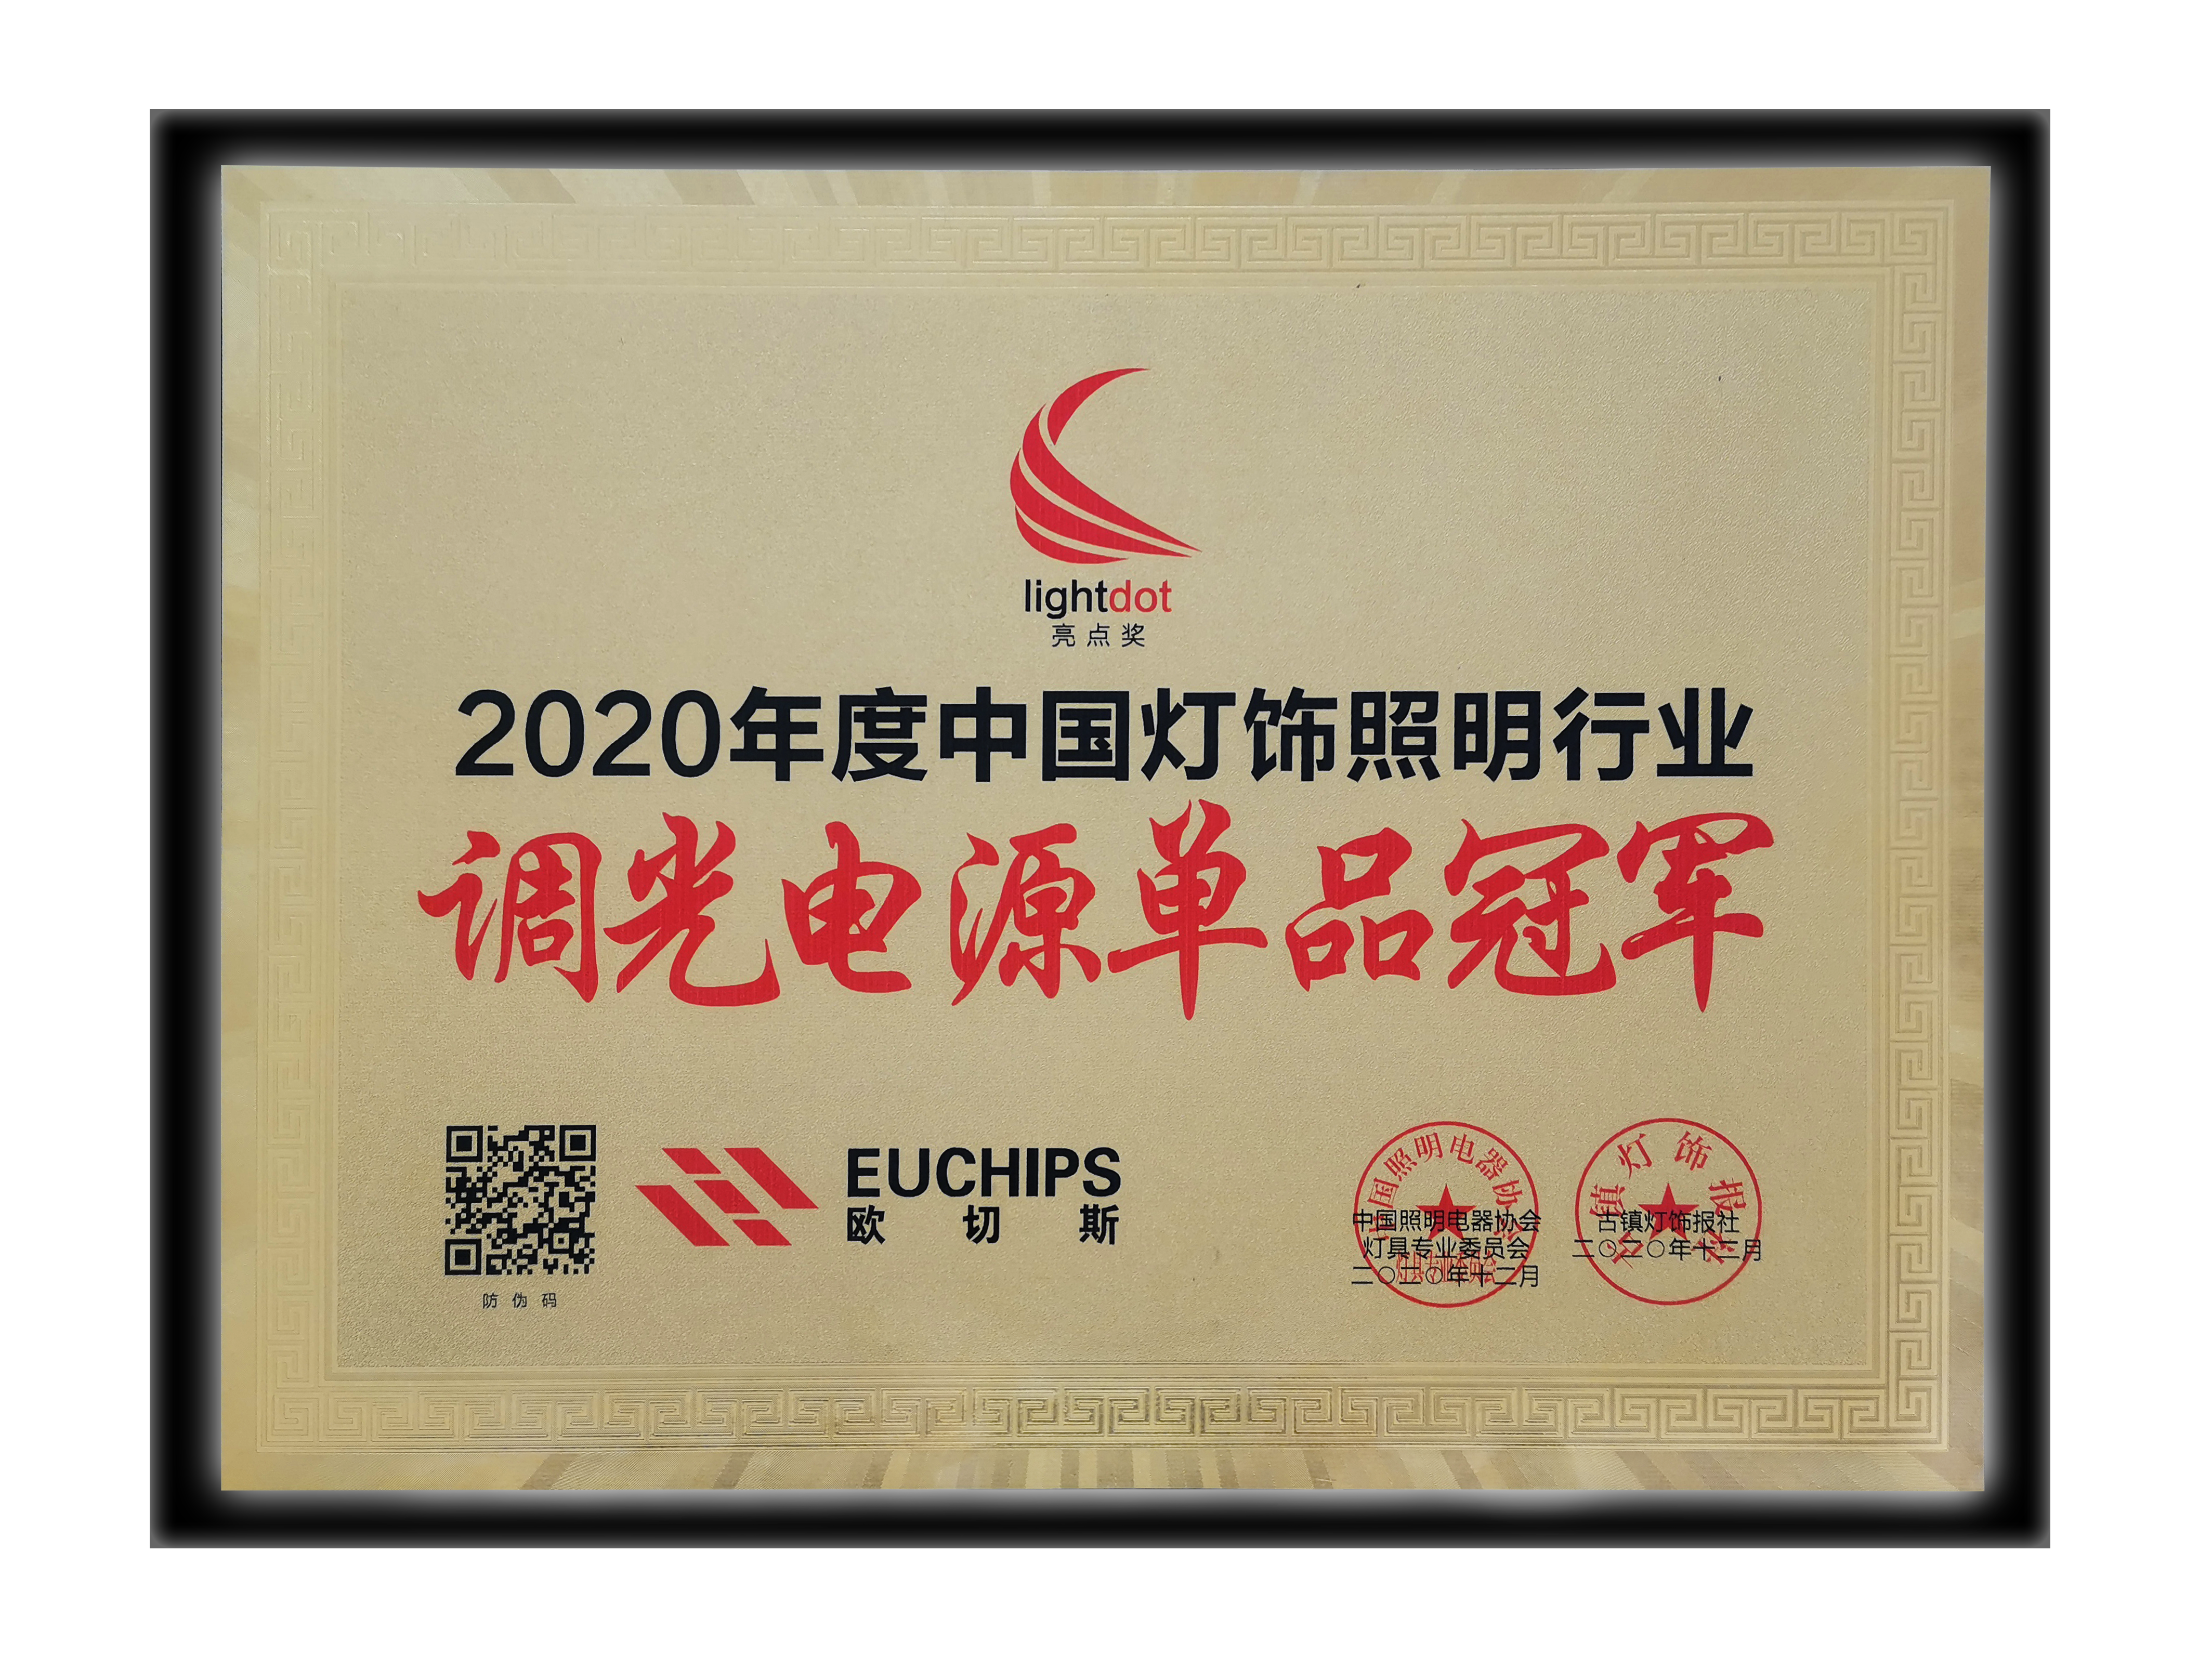 5. 2020 China Lighting Industry - Champion of LED Dimming Drivers